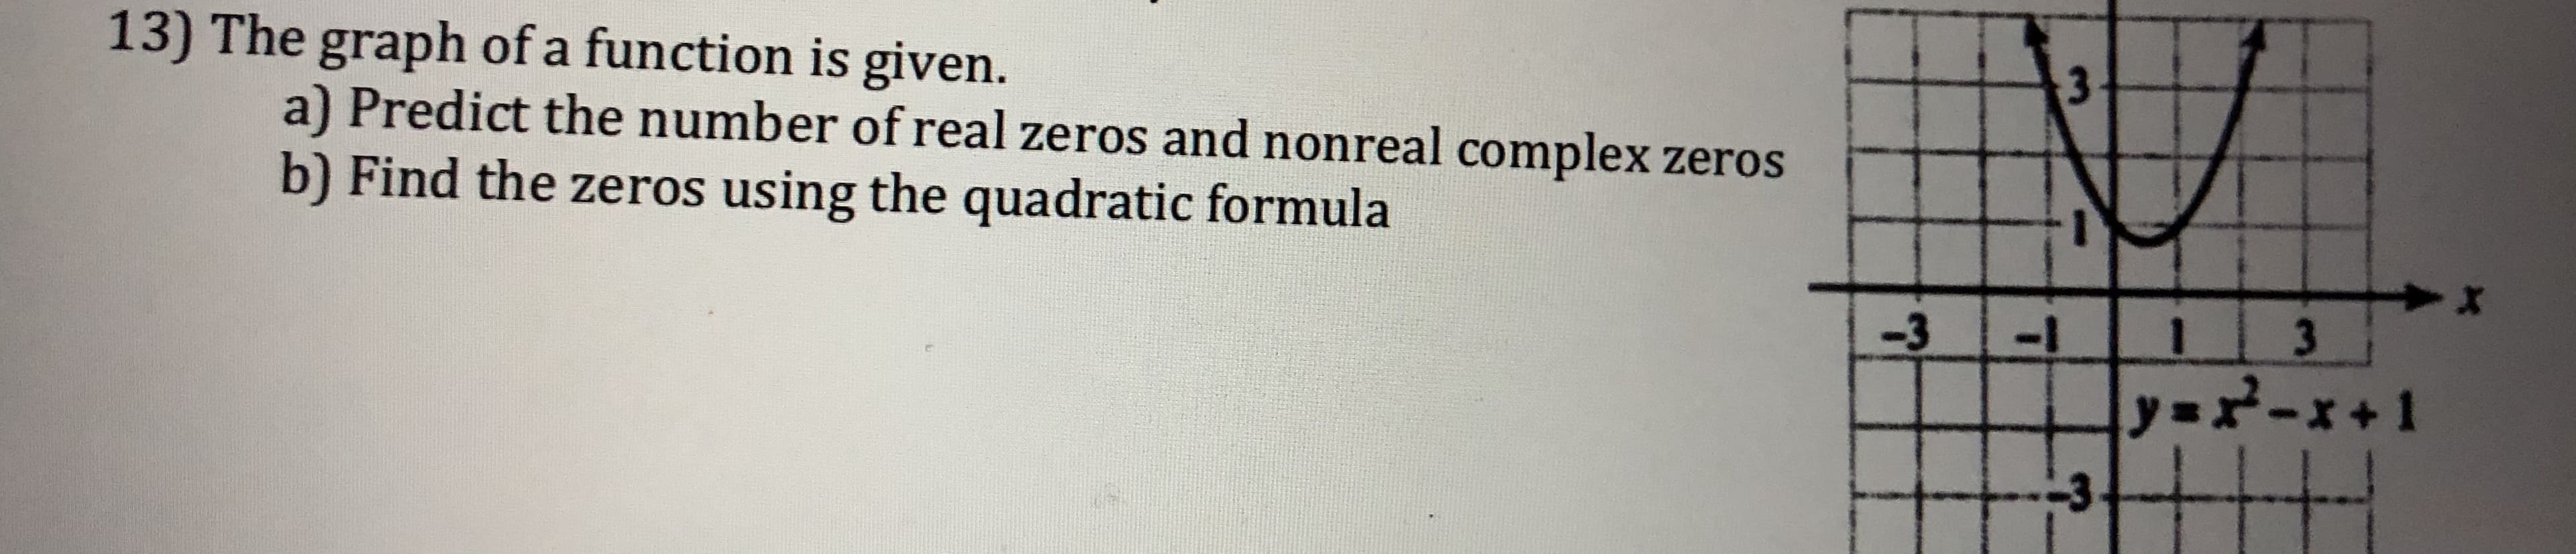 13) The graph of a function is given.
a) Predict the number of real zeros and nonreal complex zeros
b) Find the zeros using the quadratic formula
-313
